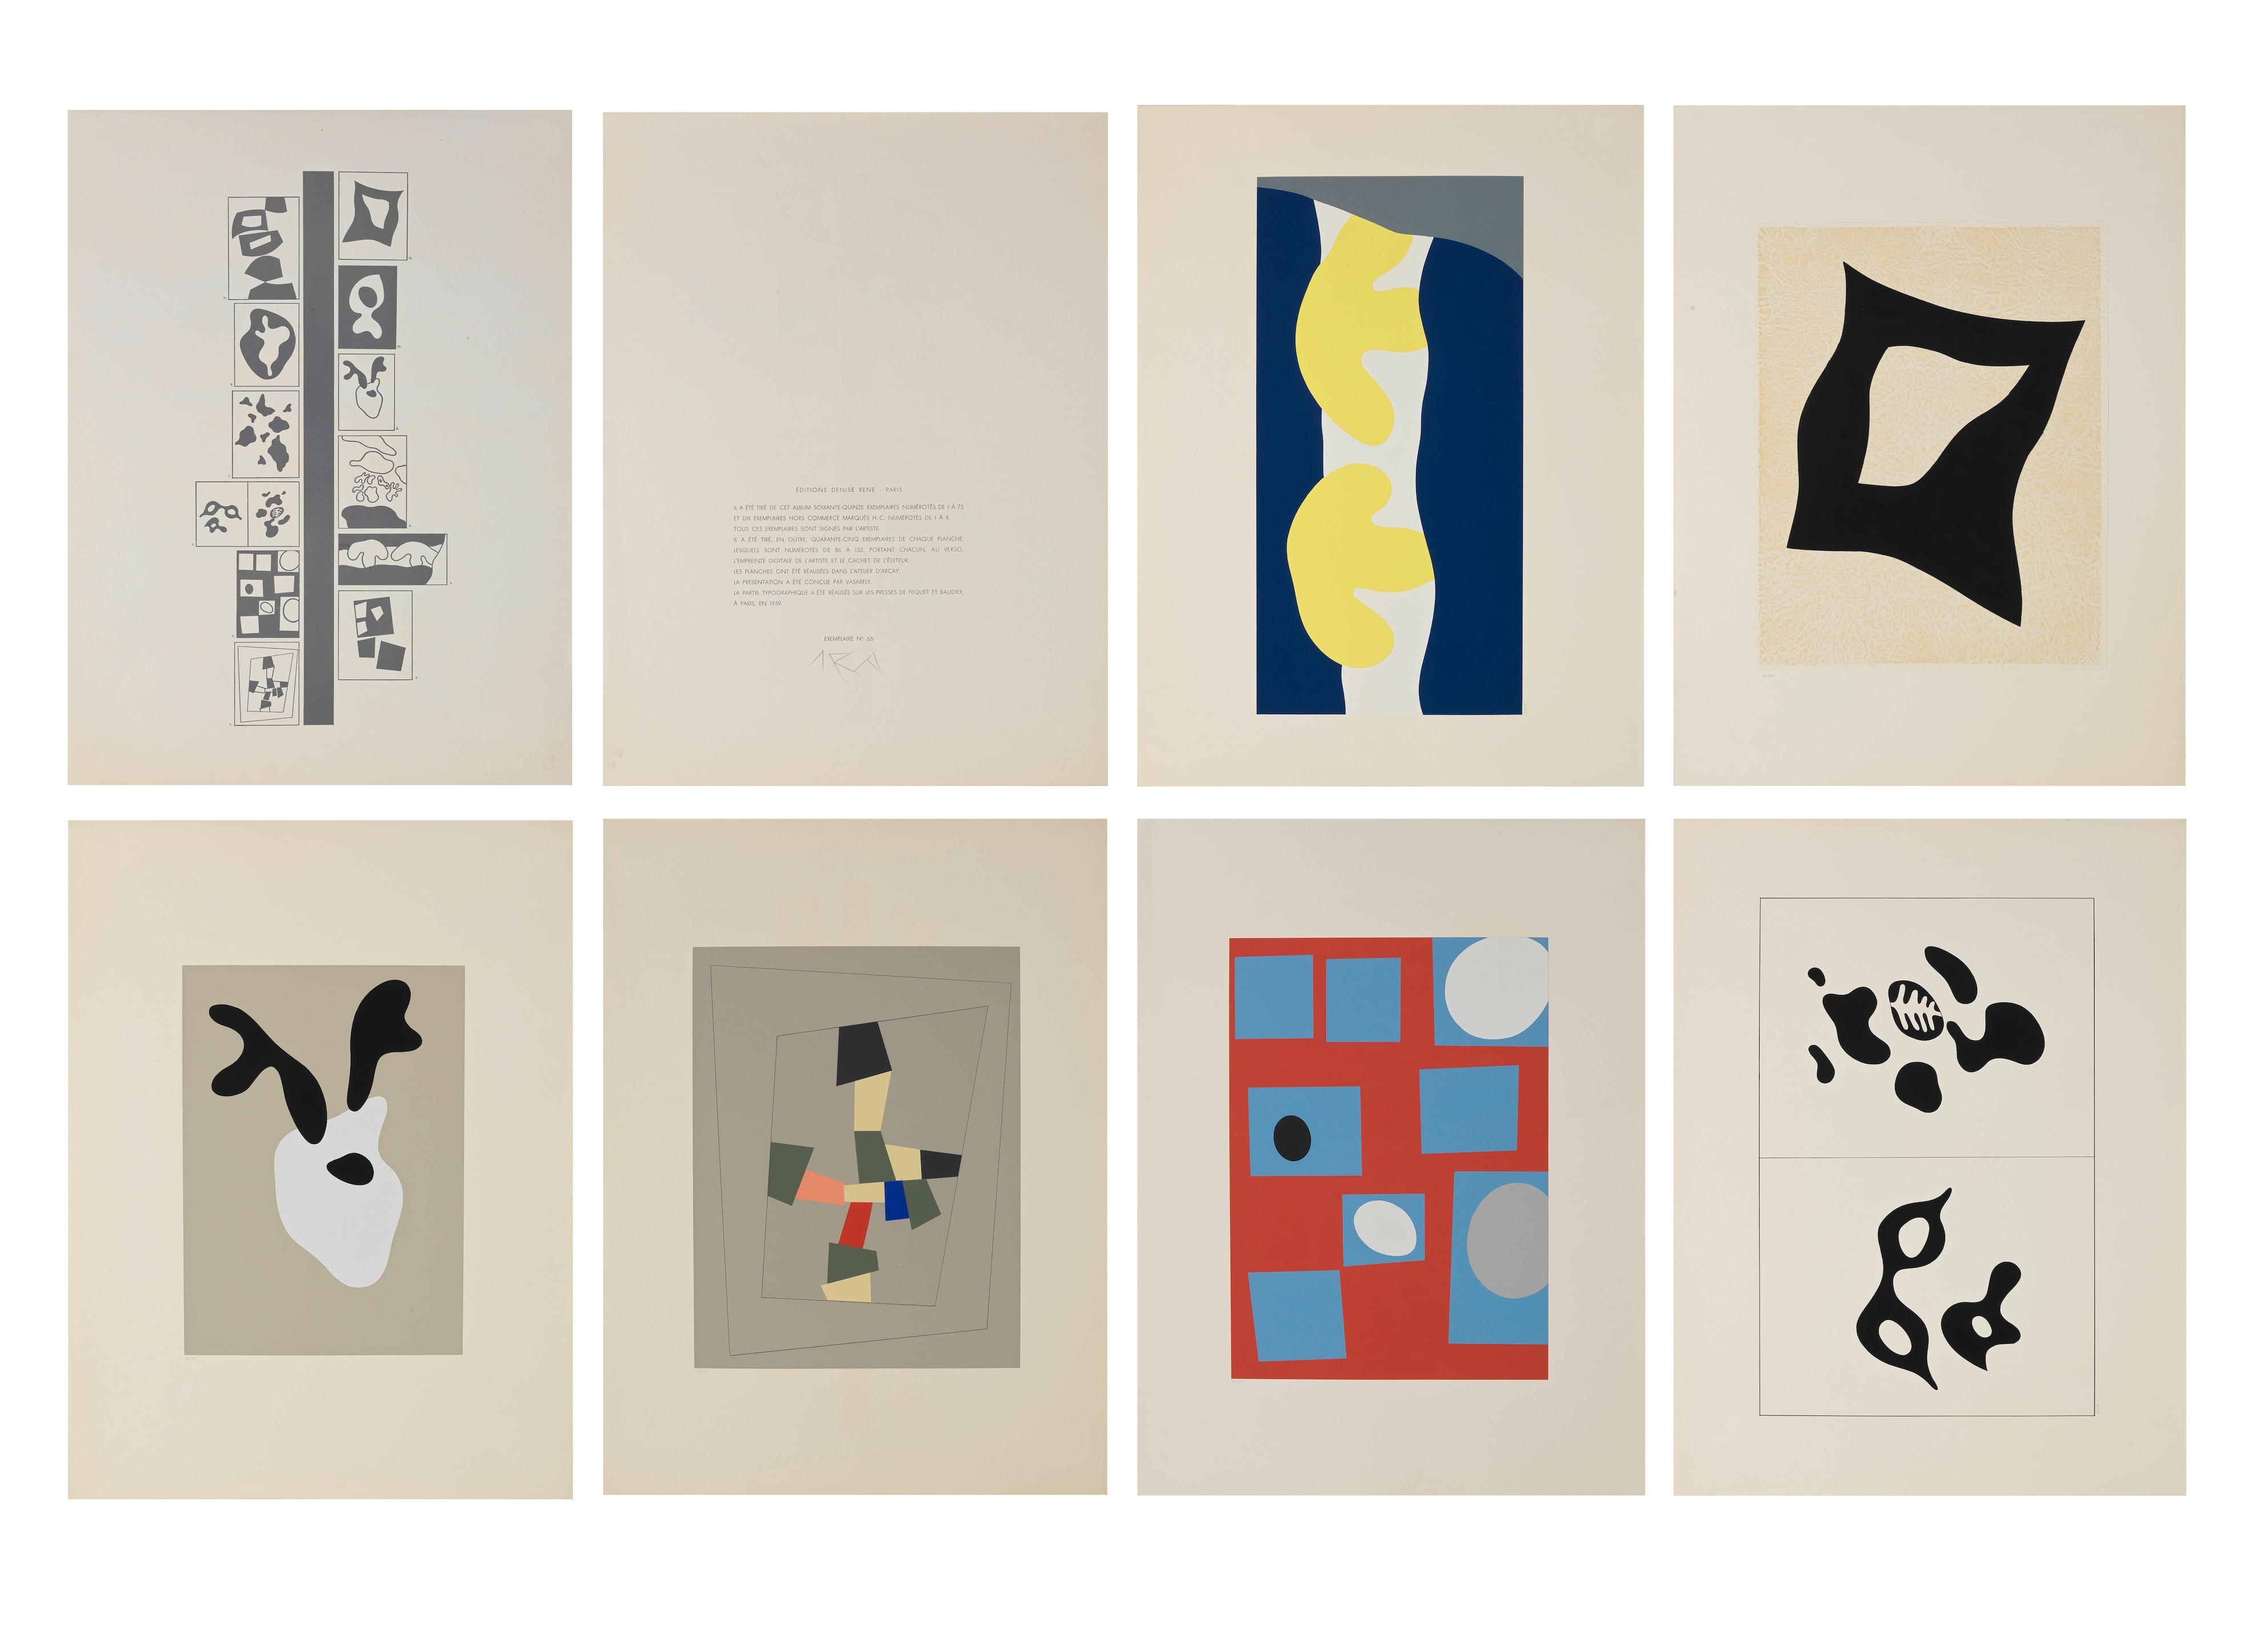 Arp by Jean Arp, 1959